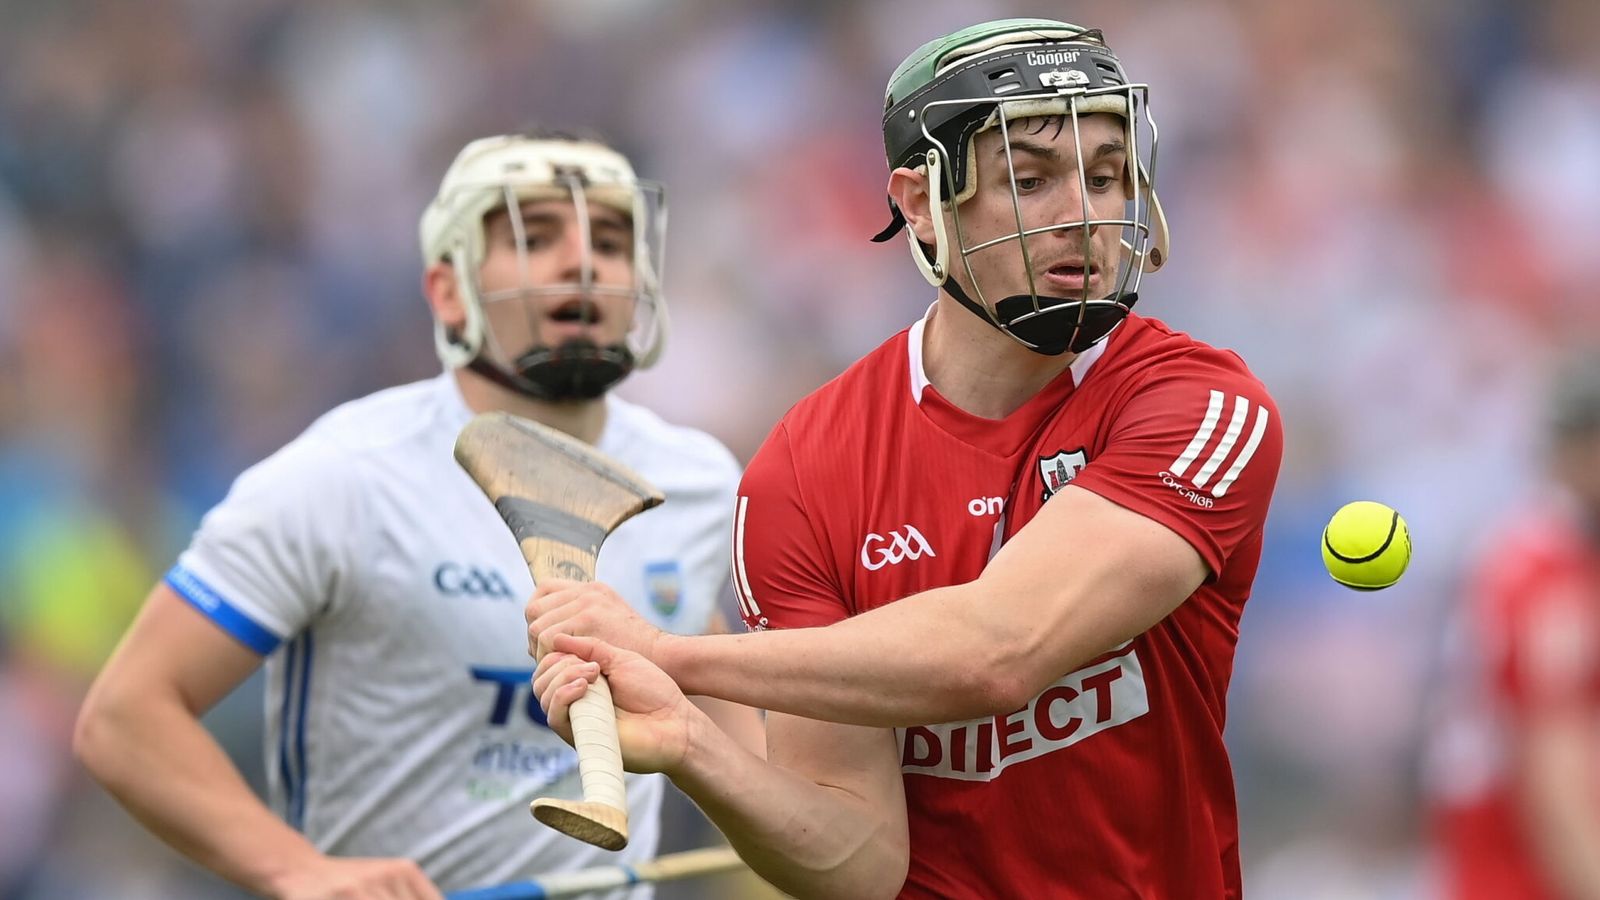 Cork to bounce back like Offaly in 1998? Jamesie O'Connor on a dramatic twist in the Munster Championship